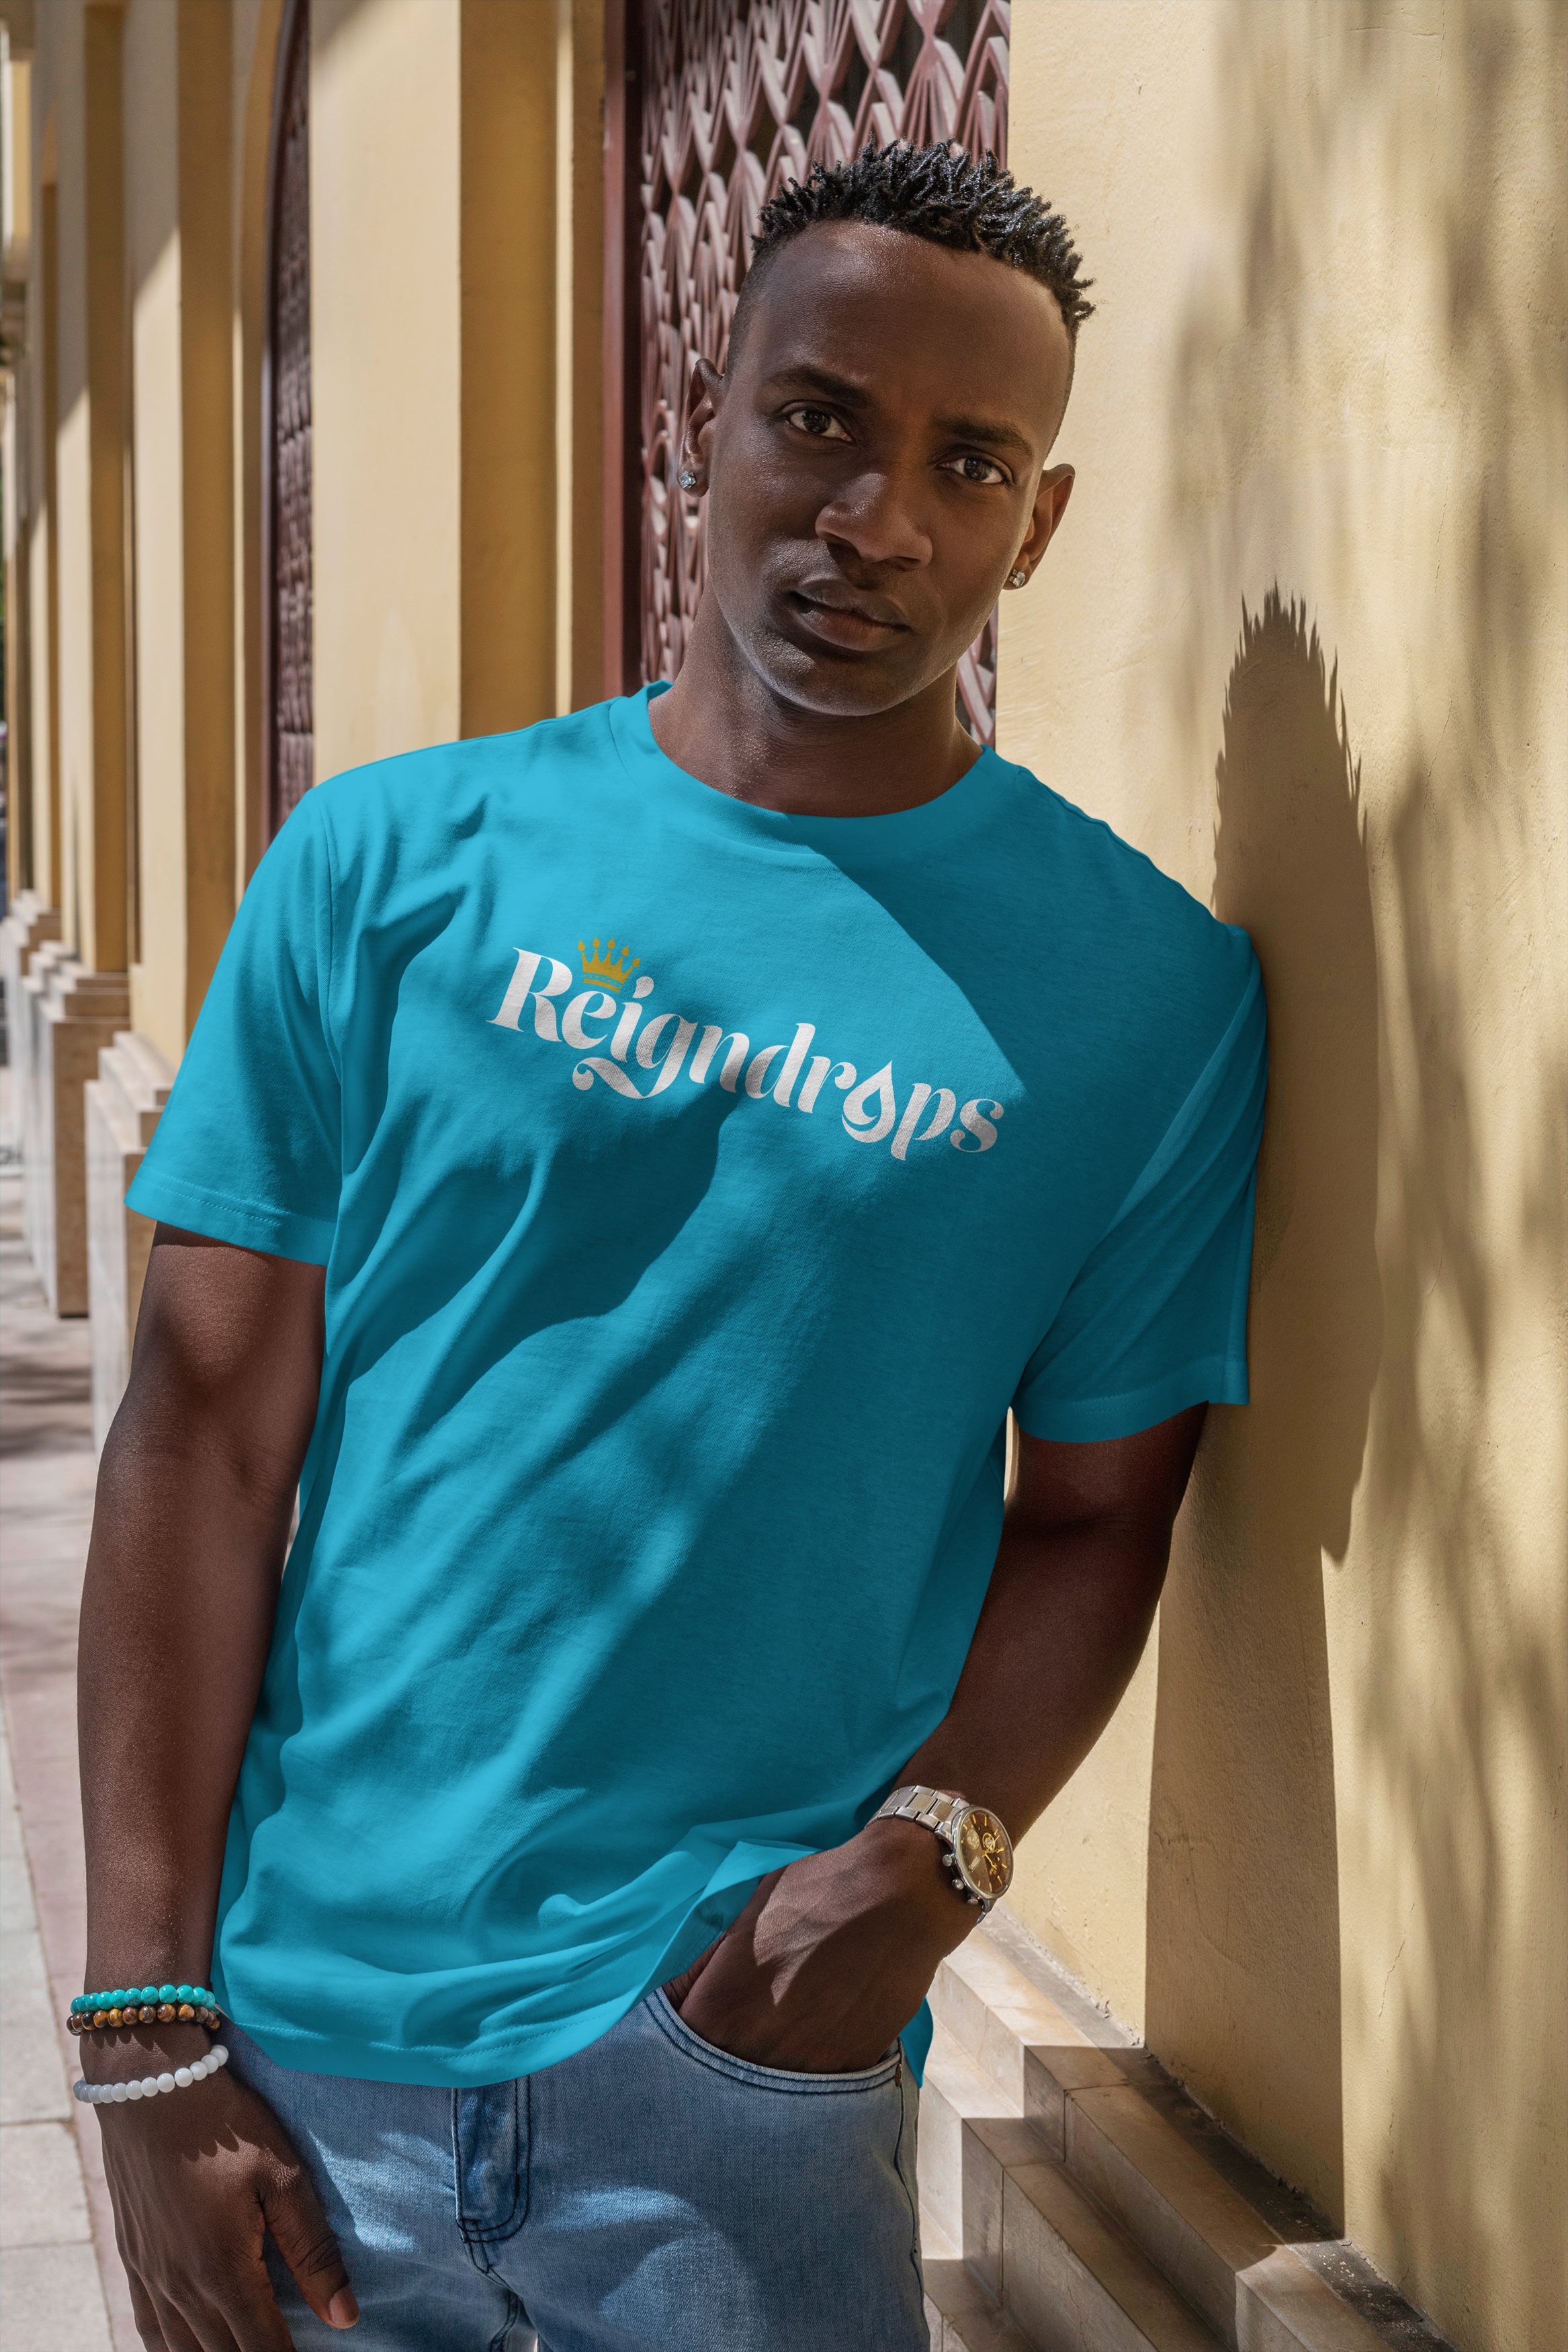 Reigndrops Tee for Men